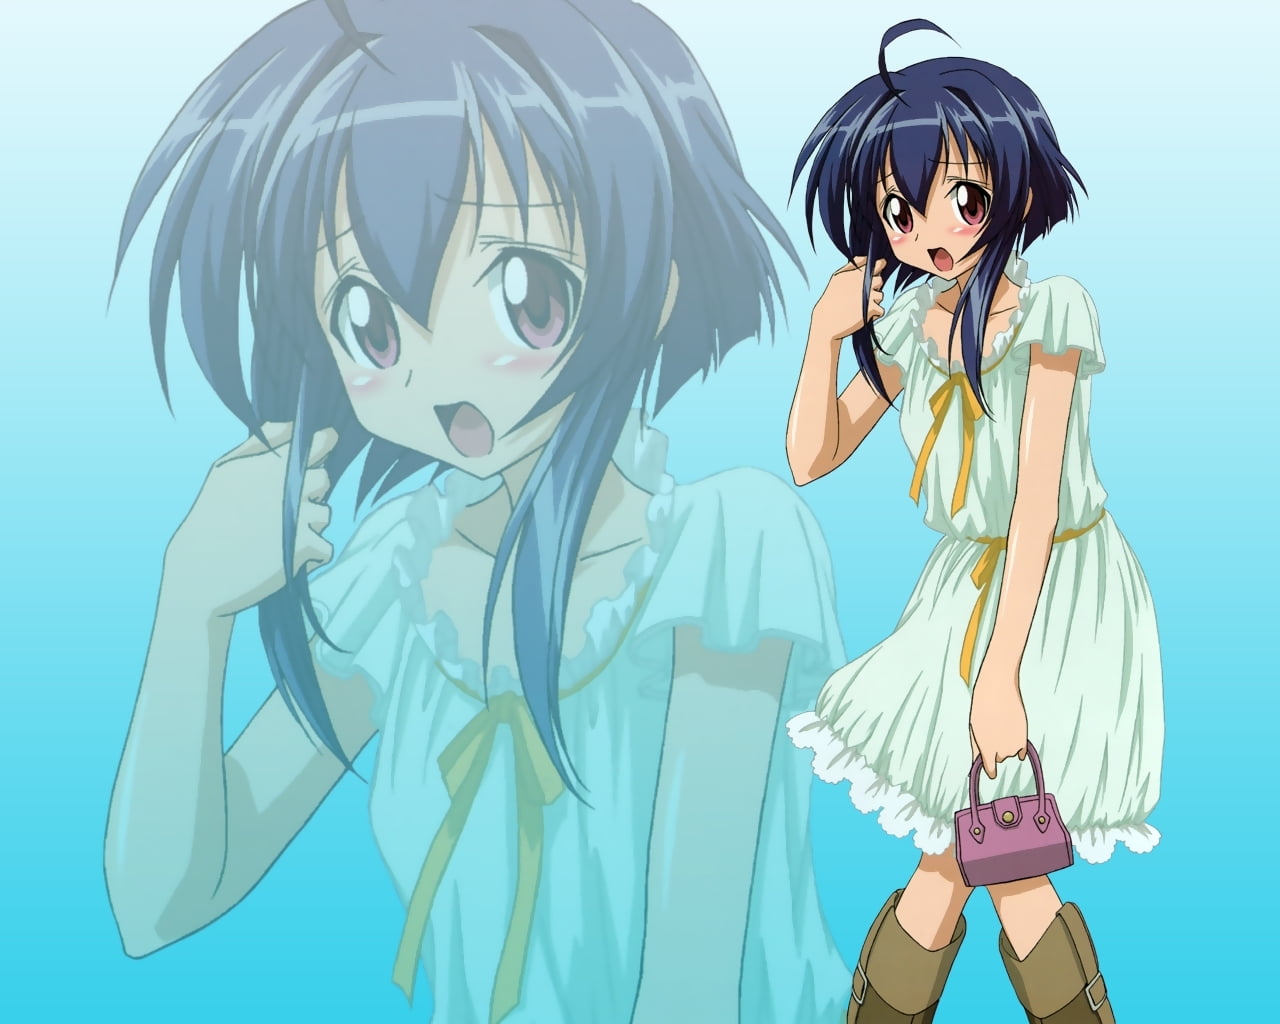 4. Dark Blue Haired Anime Character - wide 9